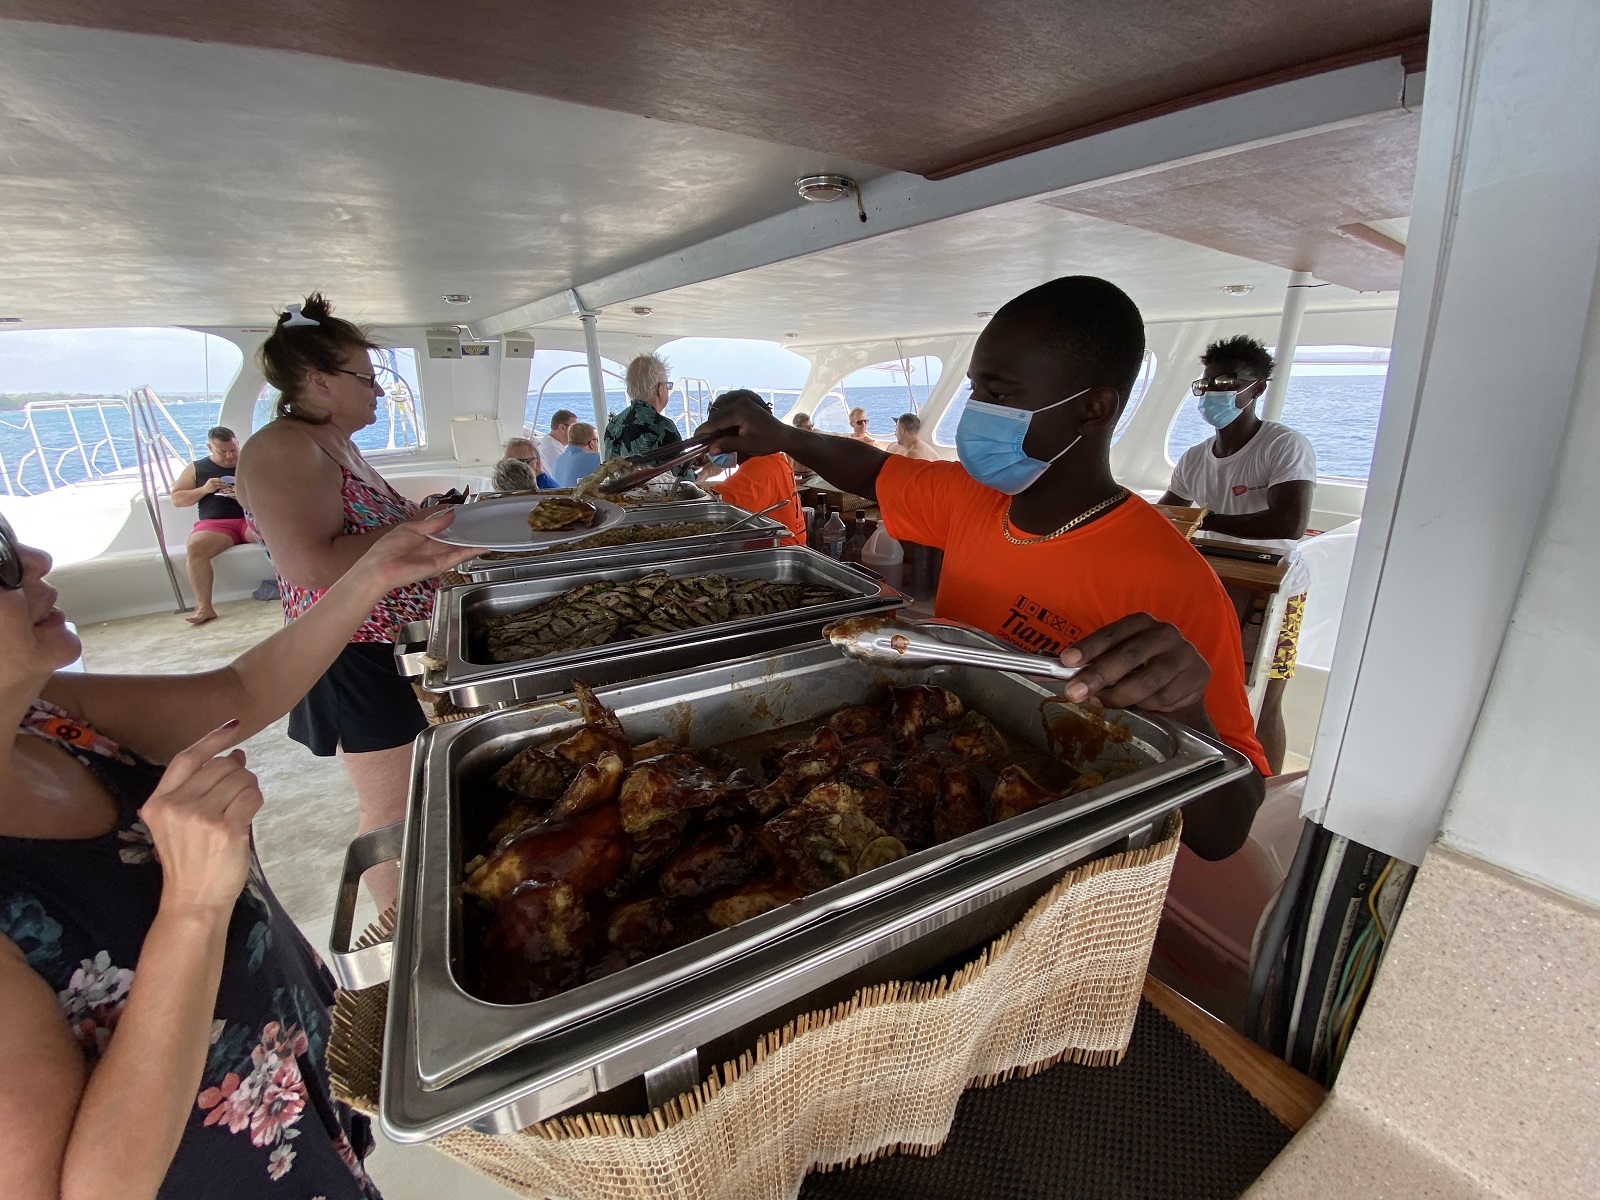 A member of the catamaran's crew serves lunch to cruisers on a shore excursion.